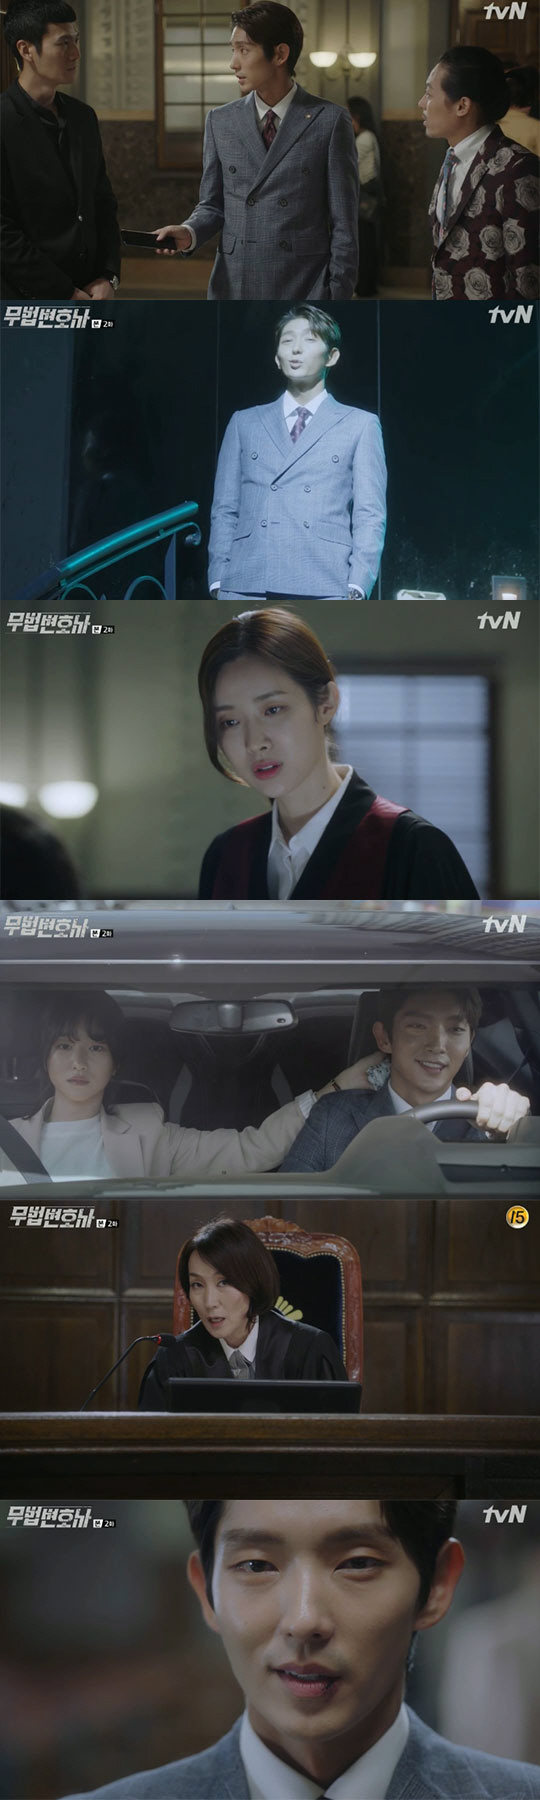 Lawless Lawyer Lee Joon-gi takes on defense of Killer Lee Dae-yeon who killed motherLee Joon-gi used gangsters under his command to delay Lee Dae-yeons trial while saving the kidnapped Seo Ye-ji.On the 13th, TVN Lawless Lawyer showed Bong Sang-pil (Lee Joon-gi) and Ha Jae-i (Seo Ye-ji) in charge of defending the case of Lee Dae-yeon in line with lawyers and secretaries.Judge Cha Moon-sook (Lee Hye-young), who reigns as the power behind Kiseong City, recommended An Oh-ju (Choi Min-soo) take over the established mayor who became vacant due to the death of the mayor, and An Oh-ju swore allegiance to her.Bong Sang-pil said he would defend Detective, who seems guilty, and laughed, saying, If you win, you can win a lotto, you can lose. I am a lawyer licensed solver.Lee Jae-jae rubbed a hamburger on Bong Sang-pils suit and said, Who is more trash among the lawyers like Detective and you who killed the market?But Bong Sang-pil said, An ex-lawyer who judges the Innocent Defendant, which has not been judged, as his own standard?While meeting Cha Moon-sook, Ha Jae-yi encountered Nam Soon-ja (Yong Hye-ran) who was a villain.Nam Soon-jas daughter Kang Yeon-hee (Cha Jung-won) was a rival to compete for a sexual saw since her school days, and Nam Soon-ja was an incompetent parent who stormed the classroom and assaulted the teacher.There was a memory that collided with Nam Soon-ja at the time. Nam Soon-ja said, The dragon from the rotten stream can not climb into the sky.Bong Sang-pil then asked Ha Jae-yi for a laundry fee, saying that he was an Italian luxury suit, while he was in the bottom of Article 1 of the Lawyers Act.Bong Sang-pil said, You do not know the law of lawyer, said Ha Jae-yi, The lawyer is self-employed. He is not protected like a doctor.In lawless, well suited, said Bong Sang-pil, stressing, Its not nothing but nothing to fight, and the lawyer is a person who fights by law.Kang Yeon-hee was convinced that Woo Hyung-man was the mayor Killer, presenting the fingerprints found on the knife, the blood of the victim found in the Innocent Defendant clothes, and the footprints found at the Murder site.Kang Yeon-hee told Bong Sang-pil and Ha Jae-yi, who appeared at the scene of the incident, Would you like to introduce a good secretary?Woo Hyung-man has spent a large amount of money to defend Go In-du (Jeon Jin-gi), a former lawyer of the former government-run Ye-woo, who was from the Hyangpan area for 25 years, but he has already colluded with Judge Cha Moon-sook and Ahn Oh-ju.Ko In-du went on trial very insensitively with the phrase under investigation.He laughed at Cha Moon-sook, saying, Its a junior look, but Cha Moon-sook gave the gong-soo a bombardment and a match and said, Protect the judges pride. Do not make me ugly.Bong Sang-pil and Ha Jae-yi went around and visited Woo Hyung-man to persuade him. Woo Hyung-man faced a death crisis in prison, and eventually he was persuaded by Bong Sang-pil.Bong Sang-pil said, The enemy is my comrade. What if a person called Detective does not recognize his face, does he remember the child who left a wound on your arm?I am the son of the woman lawyer (Choi Jin-ae, Shin Eun-jung) who you killed, he said. I will take you out of prison and kill you.Woo Hyung-man said, Please take me out once. Bong Sang-pil emphasized, The fee is your life. I will make a living hell.Bong Sang-pil was in the rain, recalling the day he left his mother, a human rights lawyer, in the raid of the An-o-ju party.Ha Jae-yi was kidnapped by Ahn Oh-jus subordinate Seokgwan-dong (Choi Dae-hoon), saying, Are you Bong Sang-pils girlfriend?Bong Sang-pil instructed his men to delay this trial until I come, and then showed off a stormy suit action to save Ha Jae-yi.Bong Sang-pil said, If I do not have a secretary, I will be uncomfortable. He said, It will be a fight between us in the future.Bong Sang-pils men who entered the court turned the court over with their own plates, and Bong Sang-pil returned through the scattered fire extinguisher powder.Now were starting the trial, she smiled.